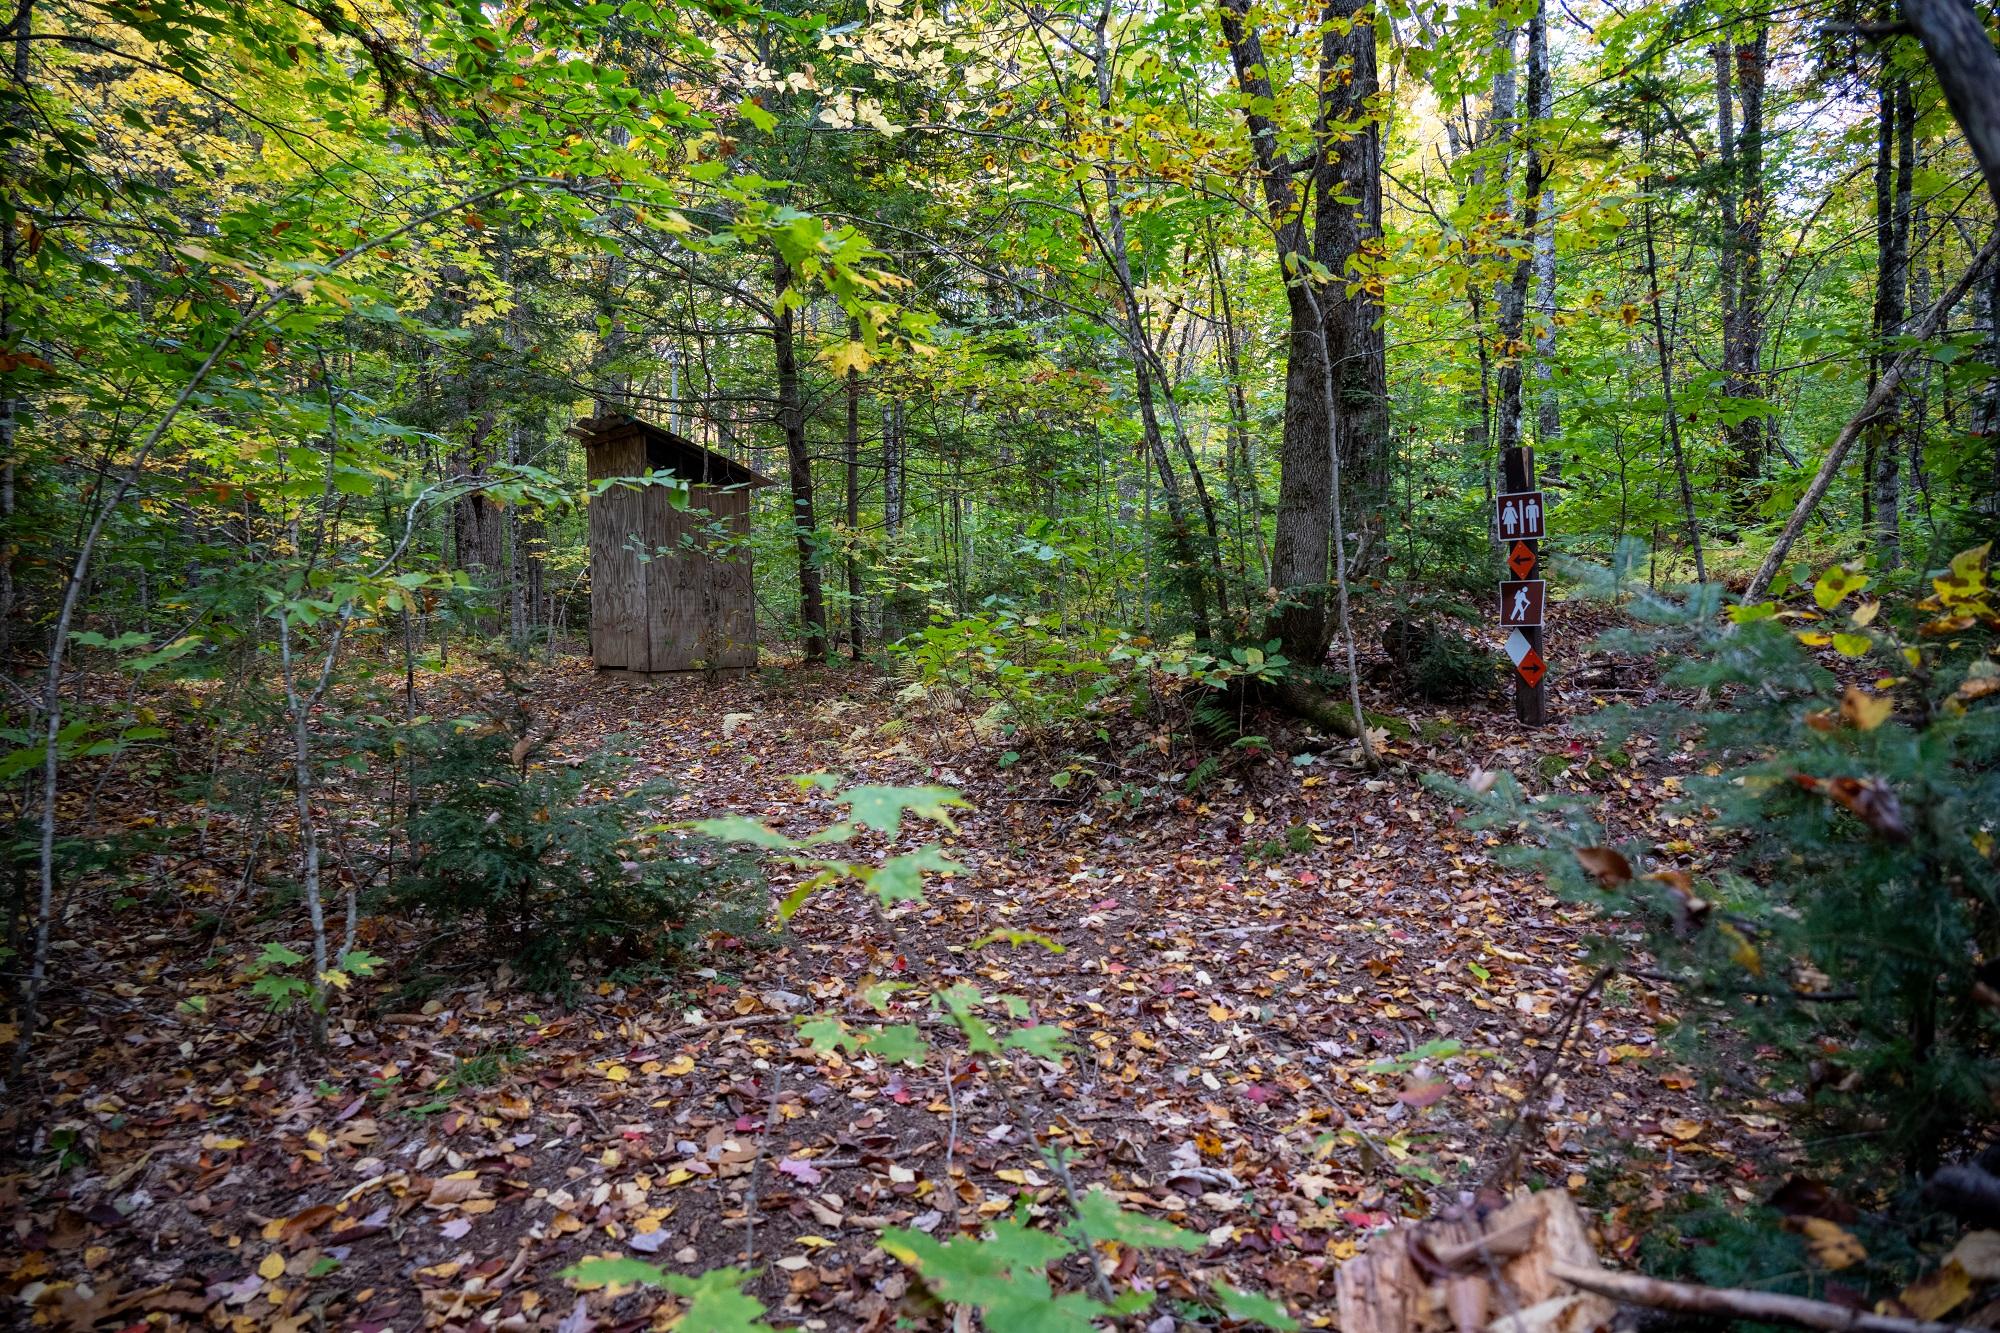 A wooden outhouse is tucked in the woods off a main dirt trail.